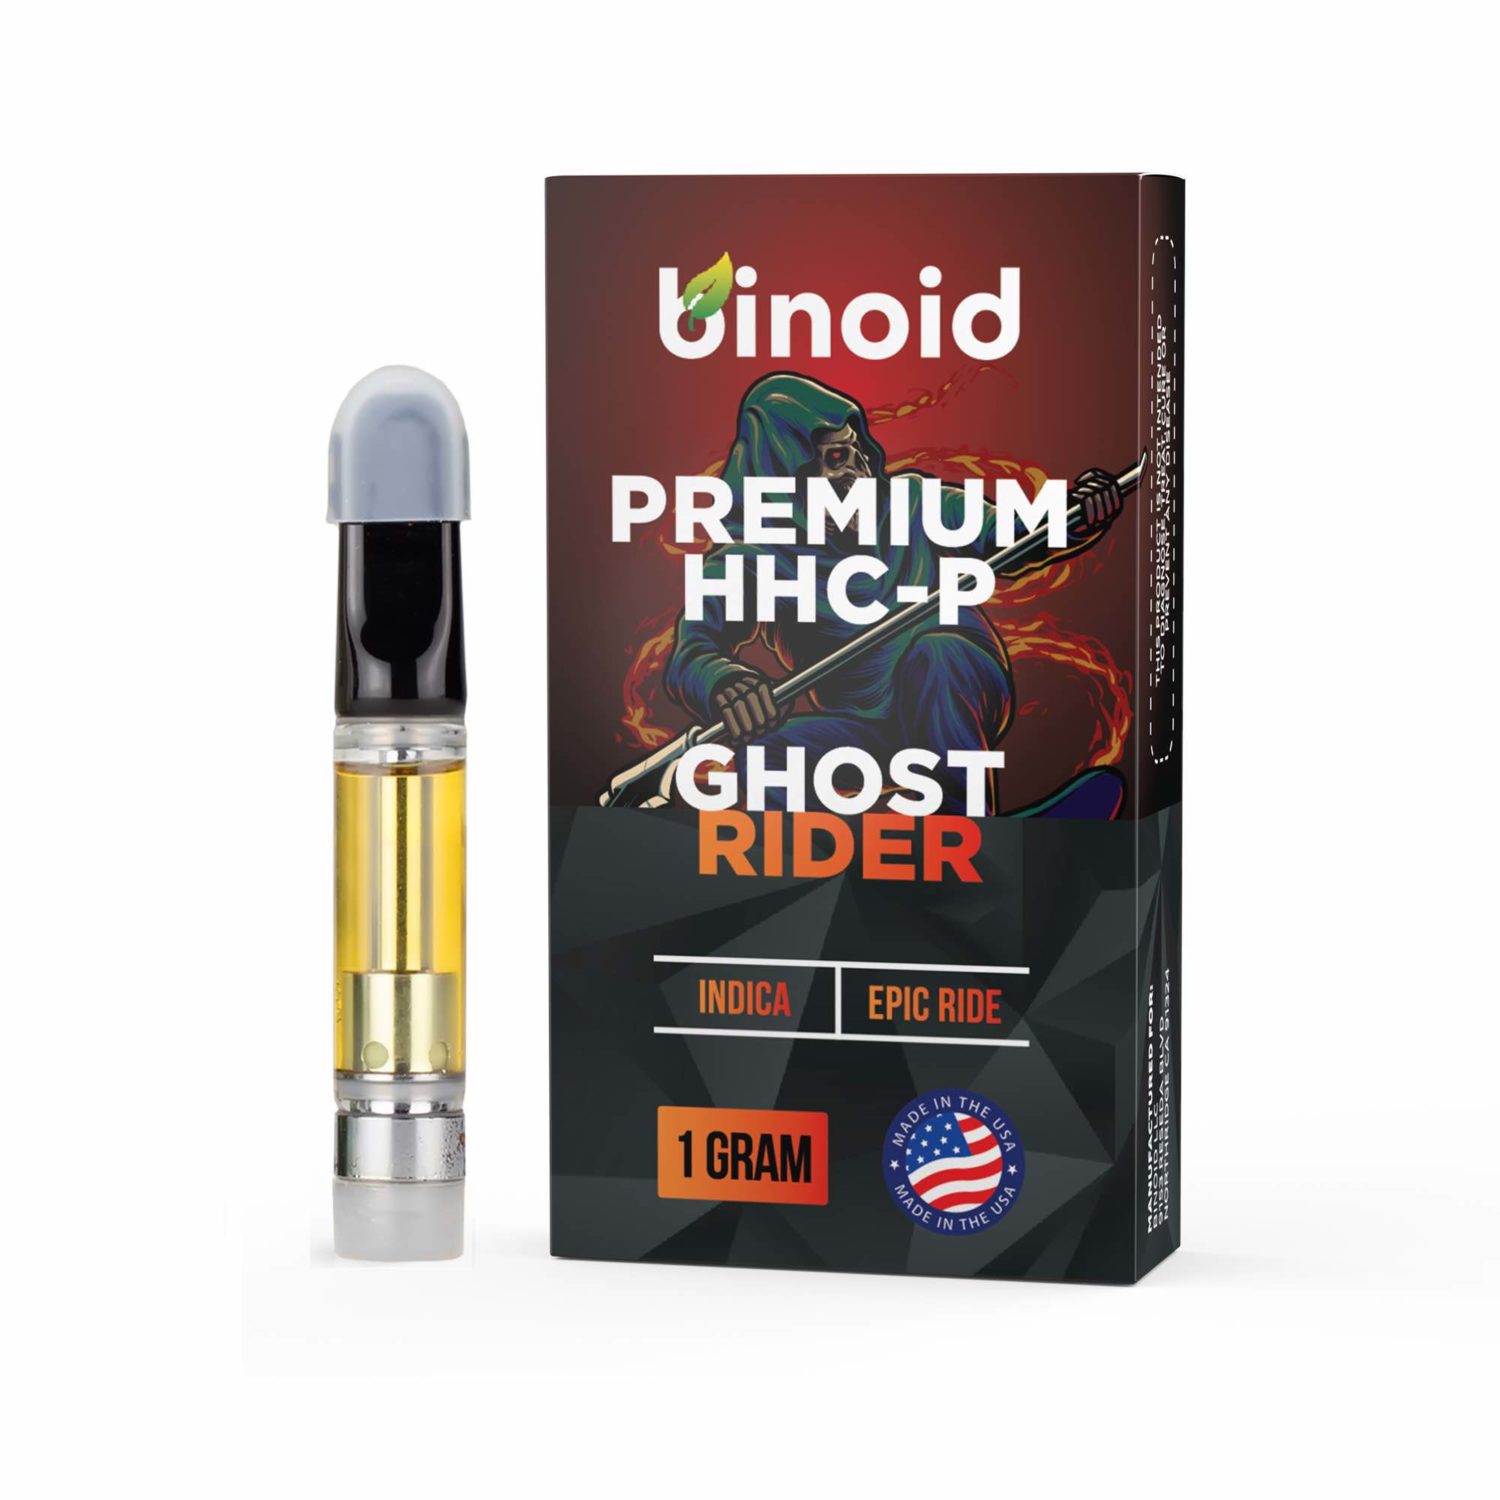 HHCP Vape Cartridge Ghost Rider Benefits Effects For Pain Anxiety Sleep Insomnia 1 gram indica best